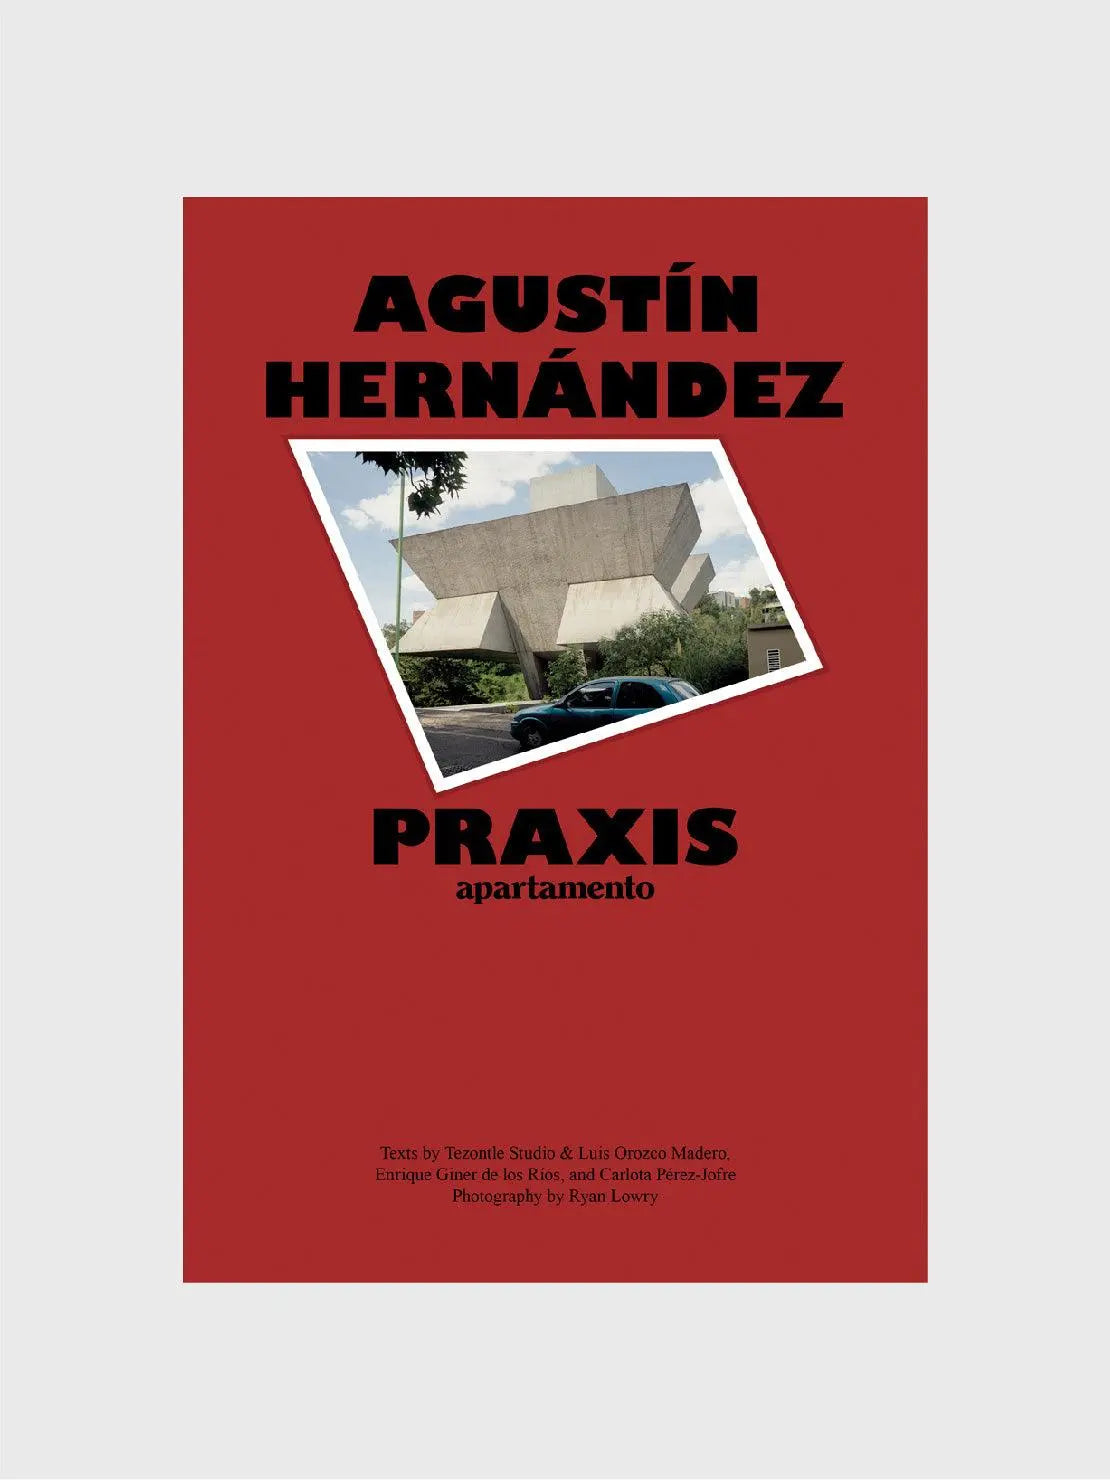 A red book cover features large black text that reads "Agustín Hernández" at the top and "Praxis" in the middle. Below the title is a photograph of a uniquely designed, modernist building in Barcelona. The authors and photographer's names are listed at the bottom, available at Bassalstore from Apartamento.